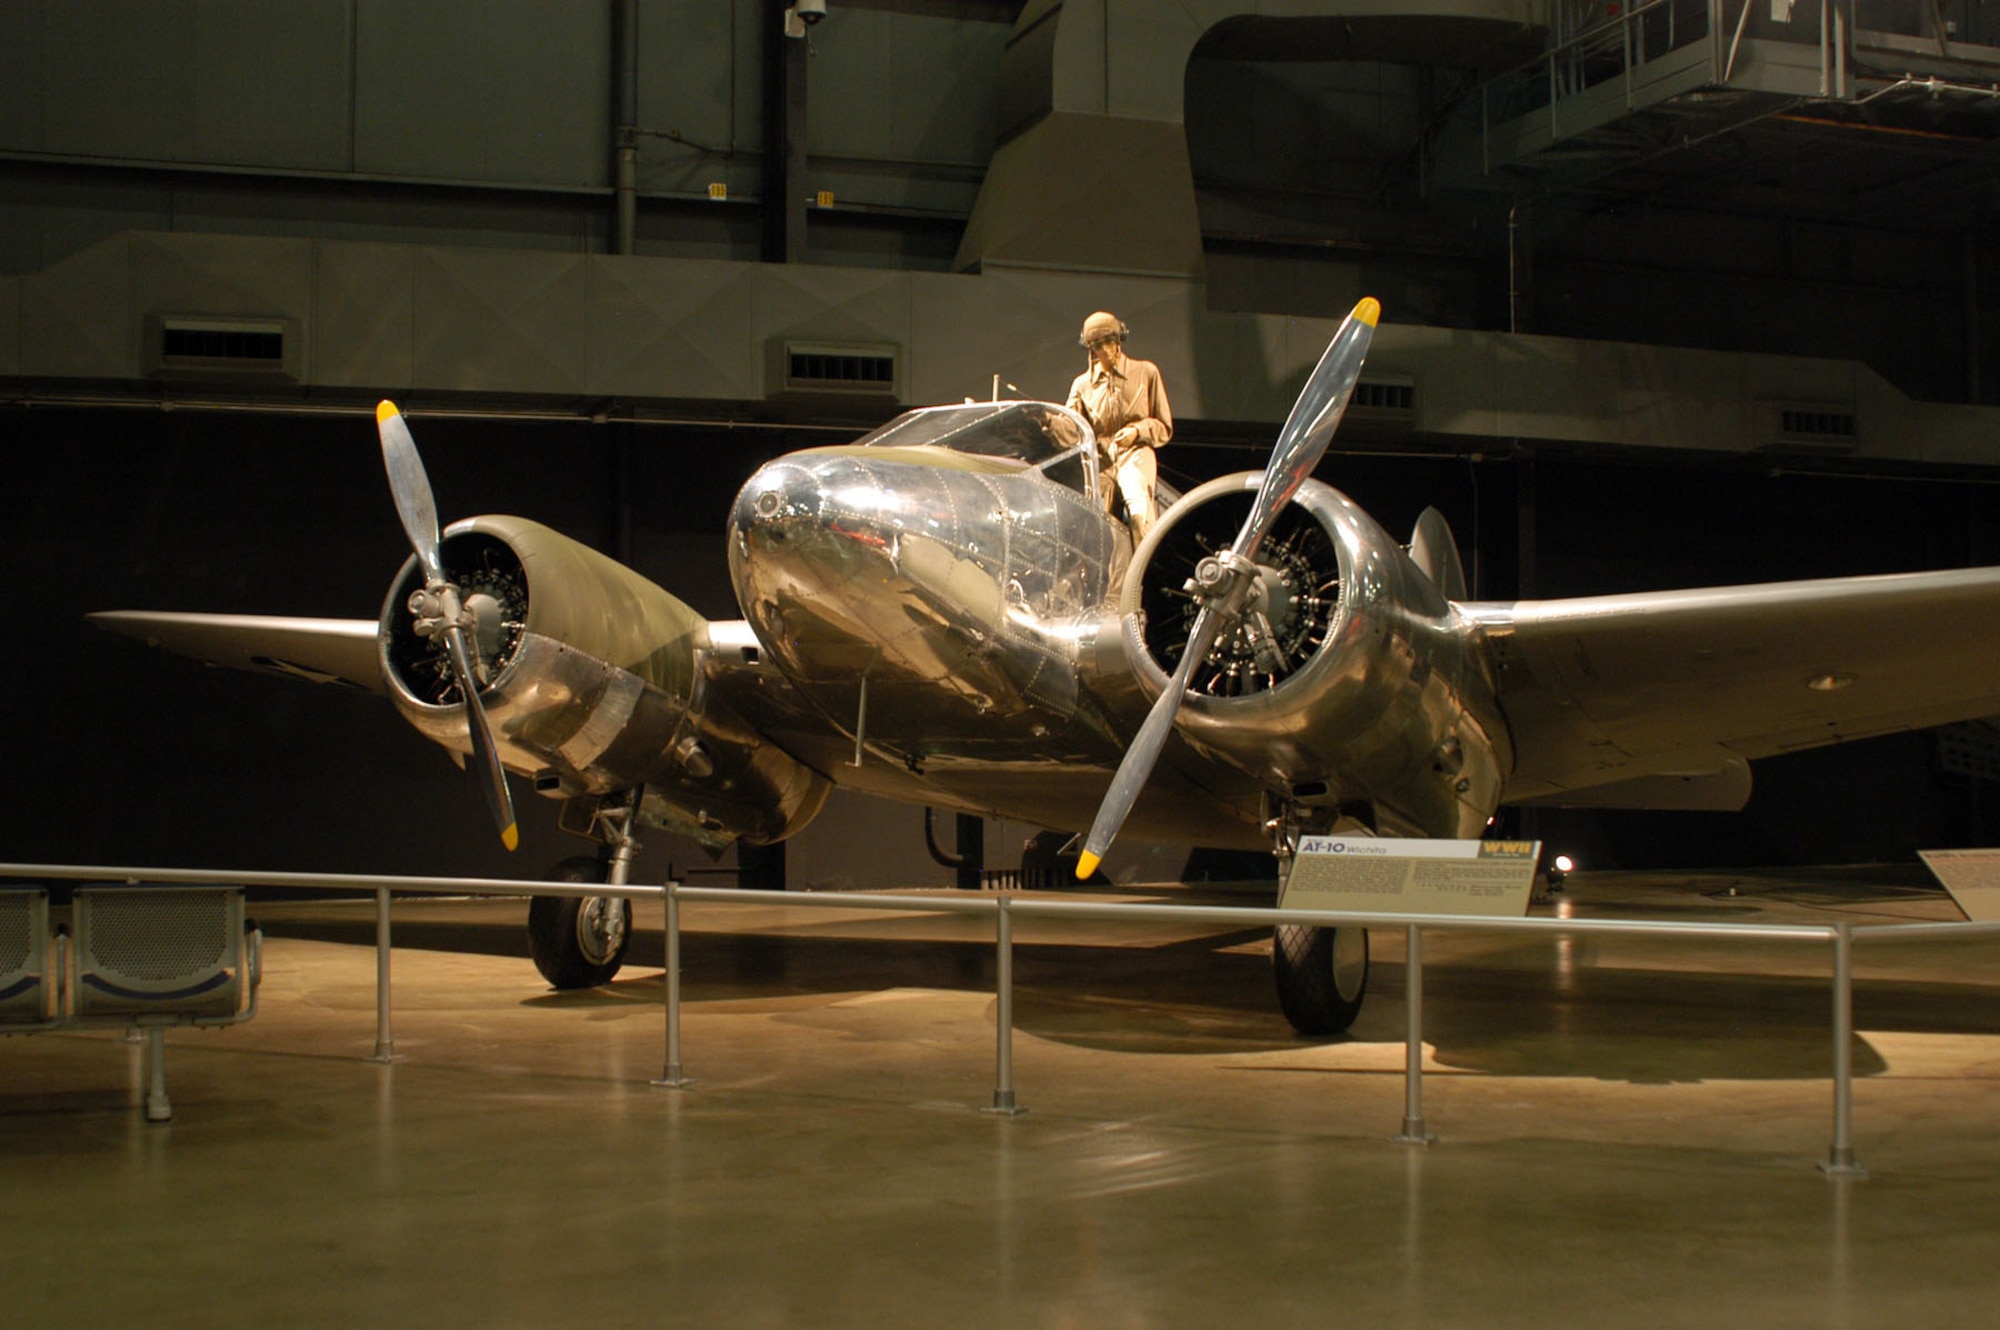 DAYTON, Ohio -- Beech AT-10 Wichita in the World War II Gallery at the National Museum of the United States Air Force. (U.S. Air Force photo)